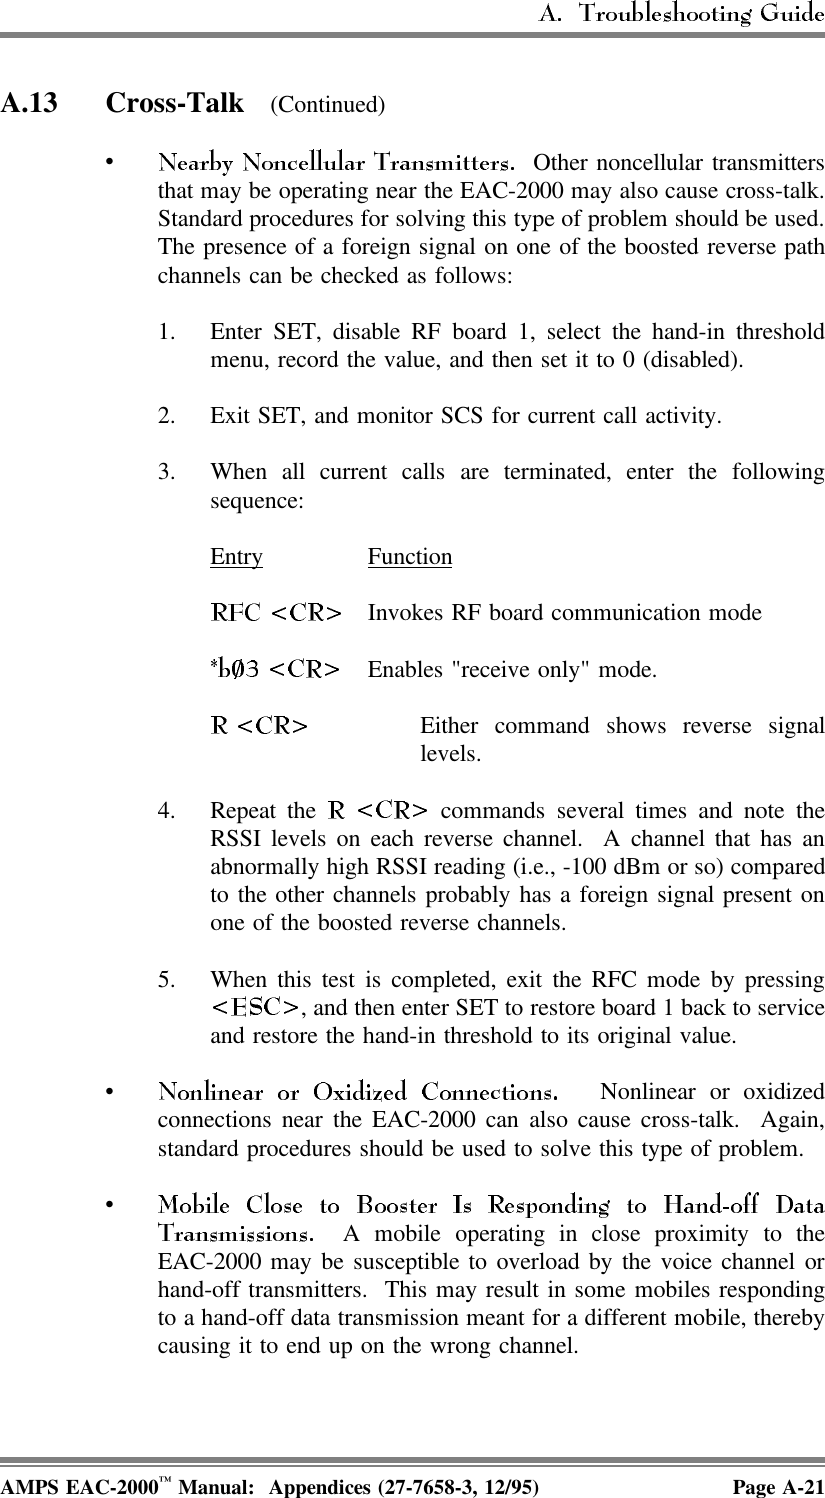 A.13 Cross-Talk  (Continued)• Other noncellular transmittersthat may be operating near the EAC-2000 may also cause cross-talk.Standard procedures for solving this type of problem should be used.The presence of a foreign signal on one of the boosted reverse pathchannels can be checked as follows:1. Enter SET, disable RF board 1, select the hand-in thresholdmenu, record the value, and then set it to 0 (disabled). 2. Exit SET, and monitor SCS for current call activity.3. When all current calls are terminated, enter the followingsequence:Entry FunctionInvokes RF board communication modeEnables &quot;receive only&quot; mode.Either command shows reverse signallevels.4. Repeat the   commands several times and note theRSSI levels on each reverse channel.  A channel that has anabnormally high RSSI reading (i.e., -100 dBm or so) comparedto the other channels probably has a foreign signal present onone of the boosted reverse channels.5. When this test is completed, exit the RFC mode by pressing, and then enter SET to restore board 1 back to serviceand restore the hand-in threshold to its original value.• Nonlinear or oxidizedconnections near the EAC-2000 can also cause cross-talk.  Again,standard procedures should be used to solve this type of problem.•  A mobile operating in close proximity to theEAC-2000 may be susceptible to overload by the voice channel orhand-off transmitters.  This may result in some mobiles respondingto a hand-off data transmission meant for a different mobile, therebycausing it to end up on the wrong channel.AMPS EAC-2000™ Manual:  Appendices (27-7658-3, 12/95) Page A-21